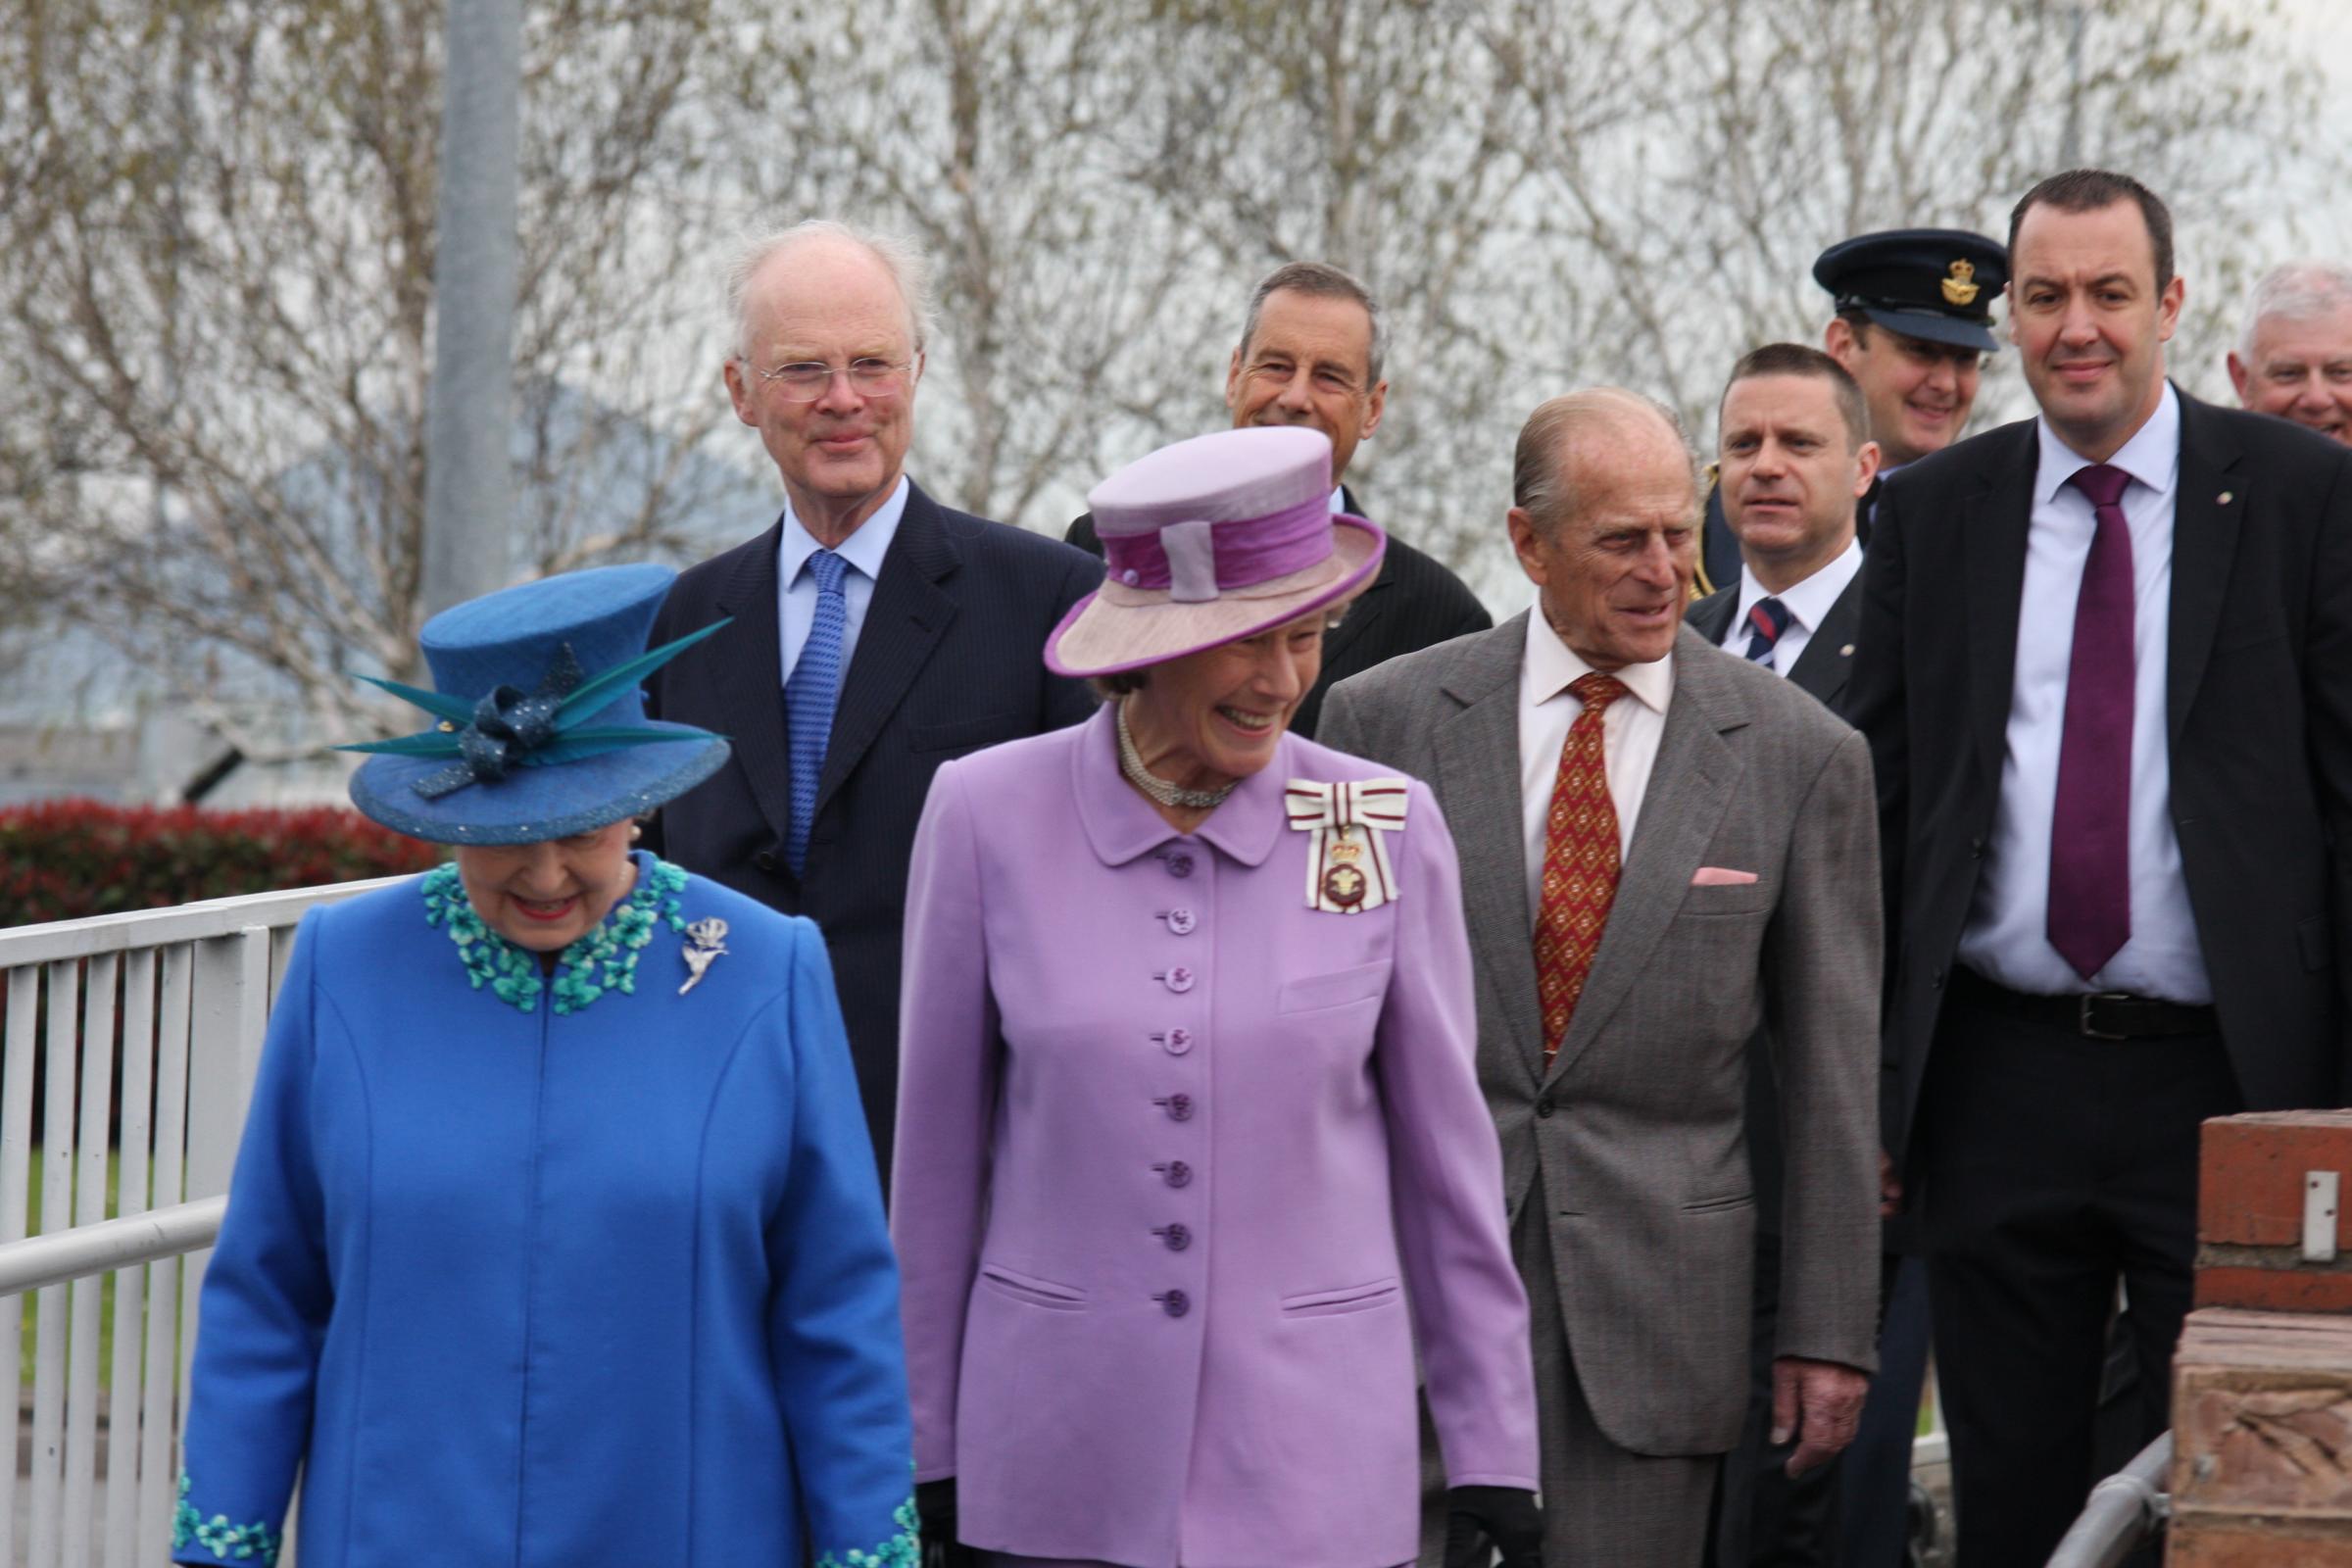 Prince phillip and queen elizabeth visit to welshpool 2010